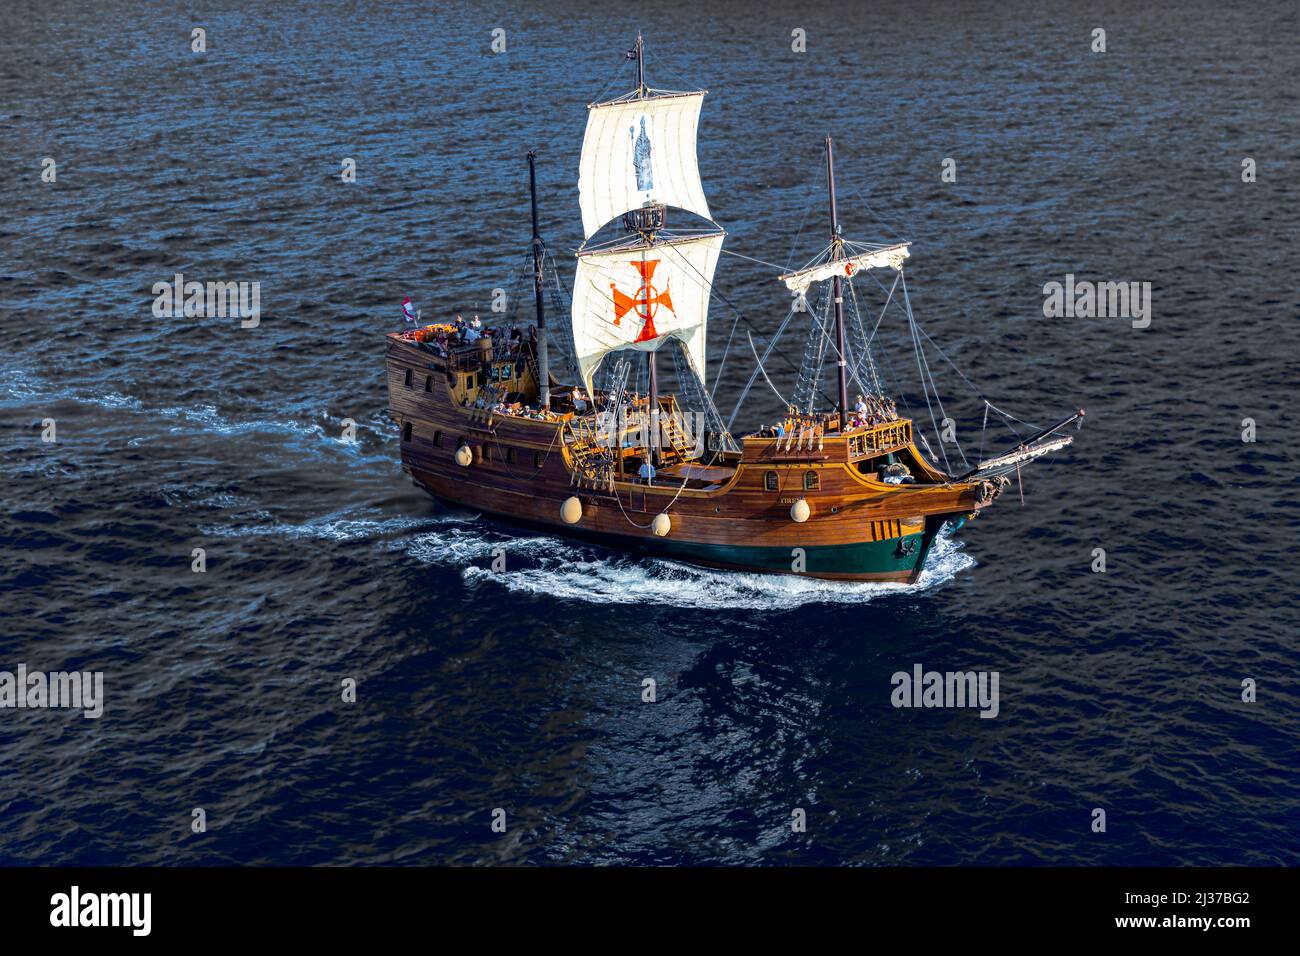 The beautiful three-masted boat named Tirena sailing in the Adriatique sea view from the rampart of dubrovnik fortified town Stock Photo